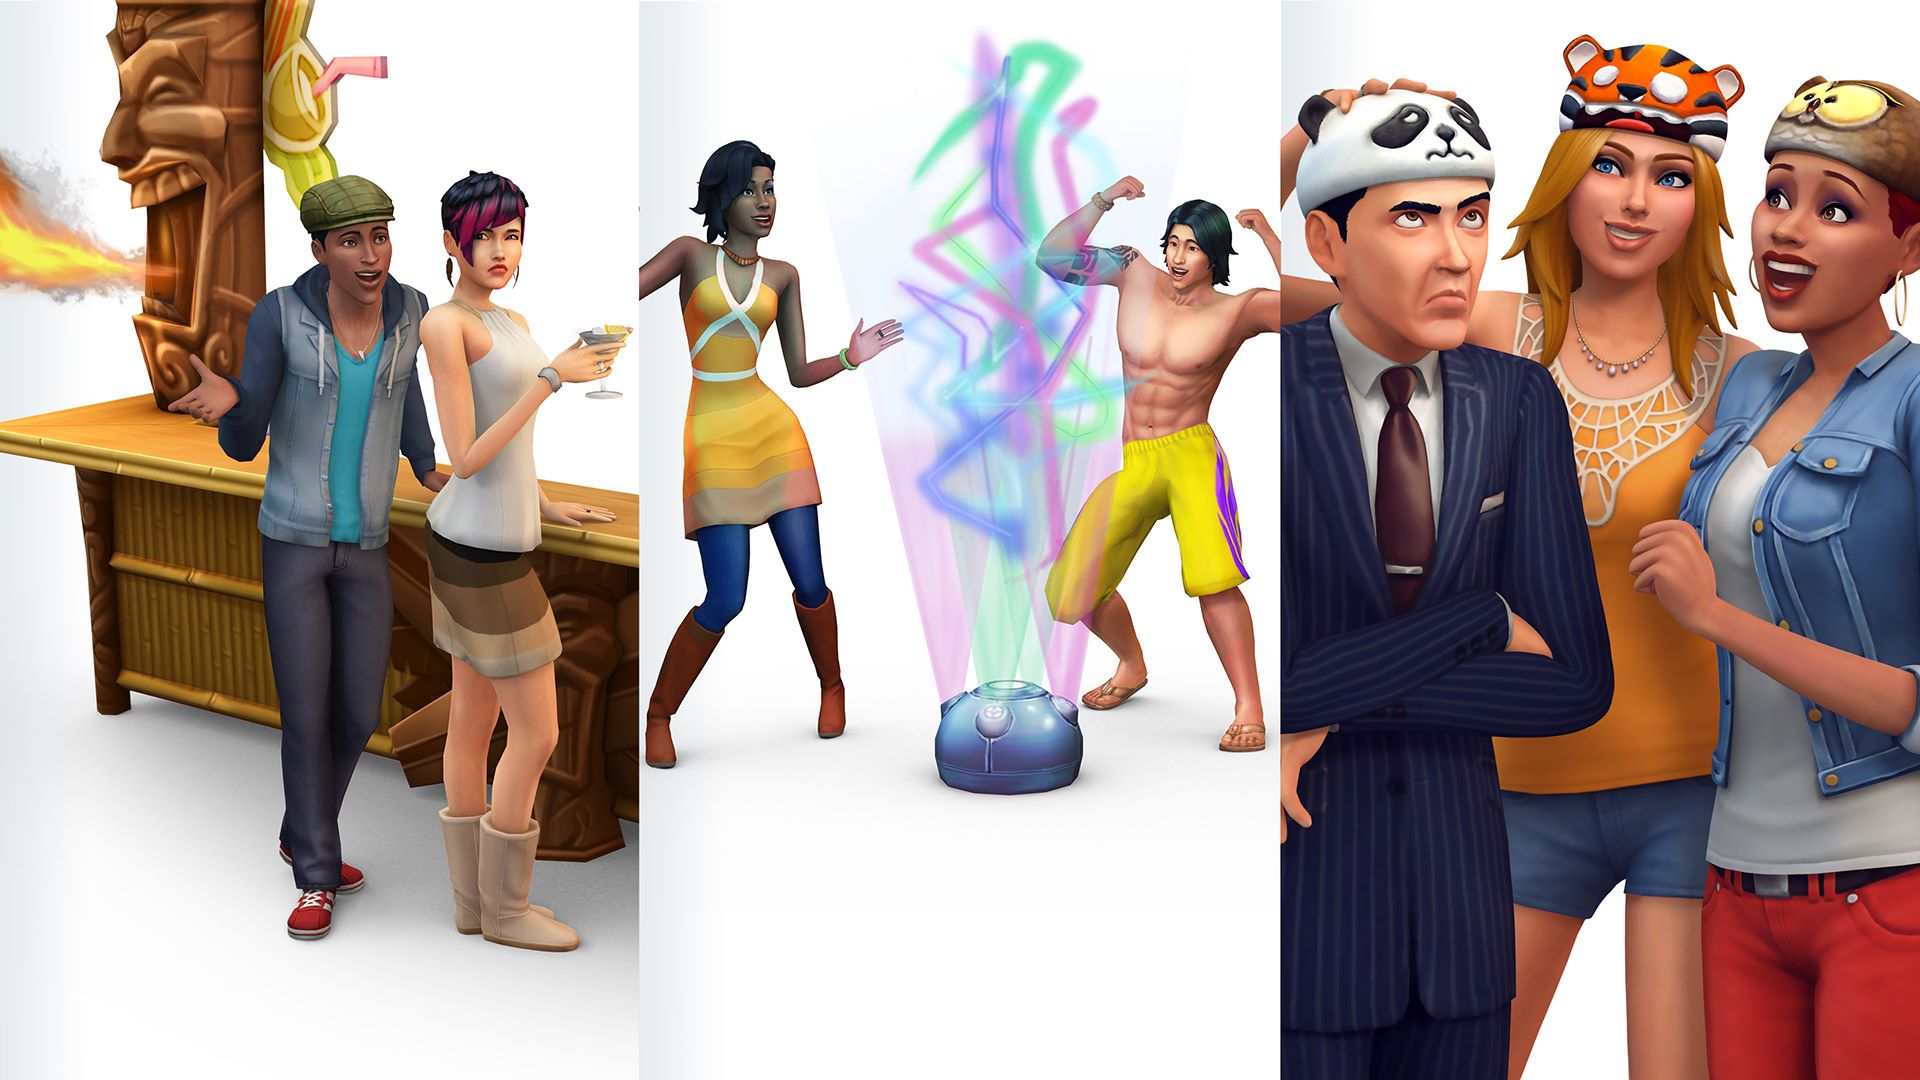 Симс 4 развлечения. «The SIMS 4: стиль Инчхона» – sp25. The SIMS™ 4 Deluxe Edition. Стиль Инчхона симс 4. Симс 4 Делюкс.